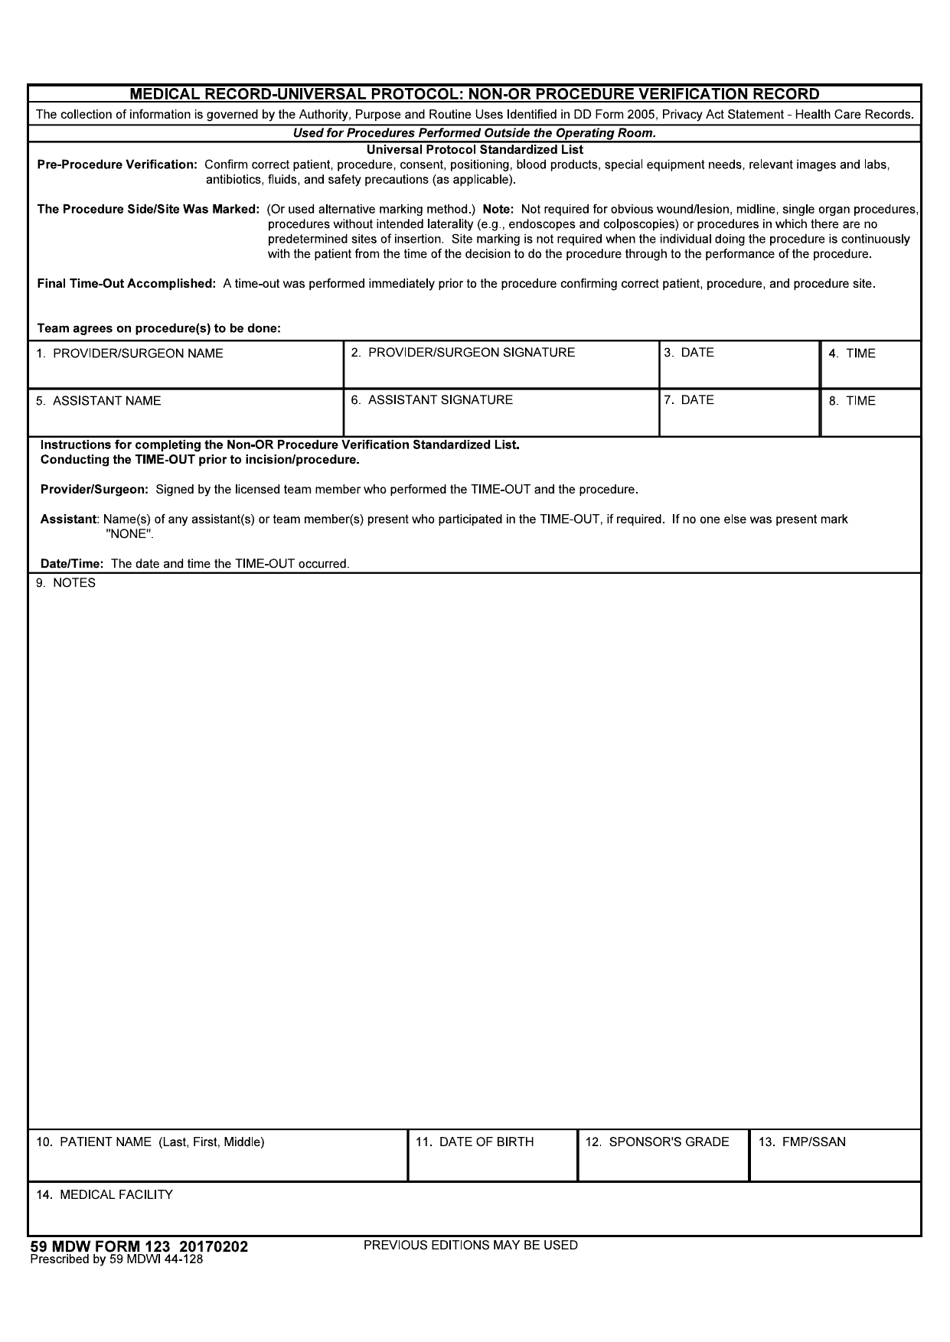 59 MDW Form 123 Medical Record - Universal Protocol - Non-or Procedure Verification Record, Page 1